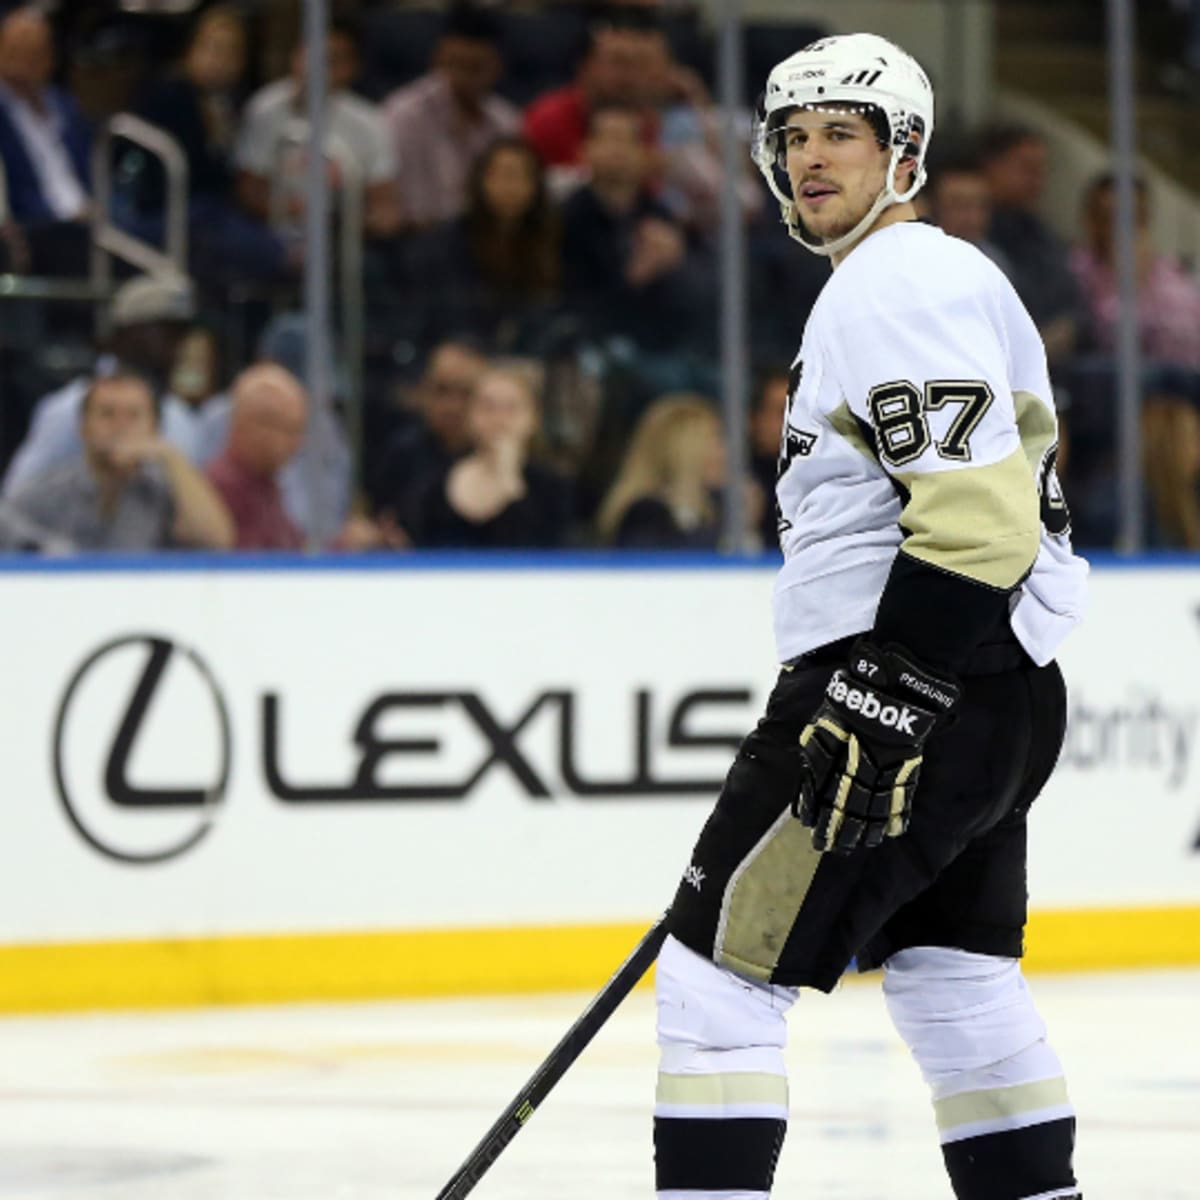 Crosby skates without jaw protector for first time - NBC Sports